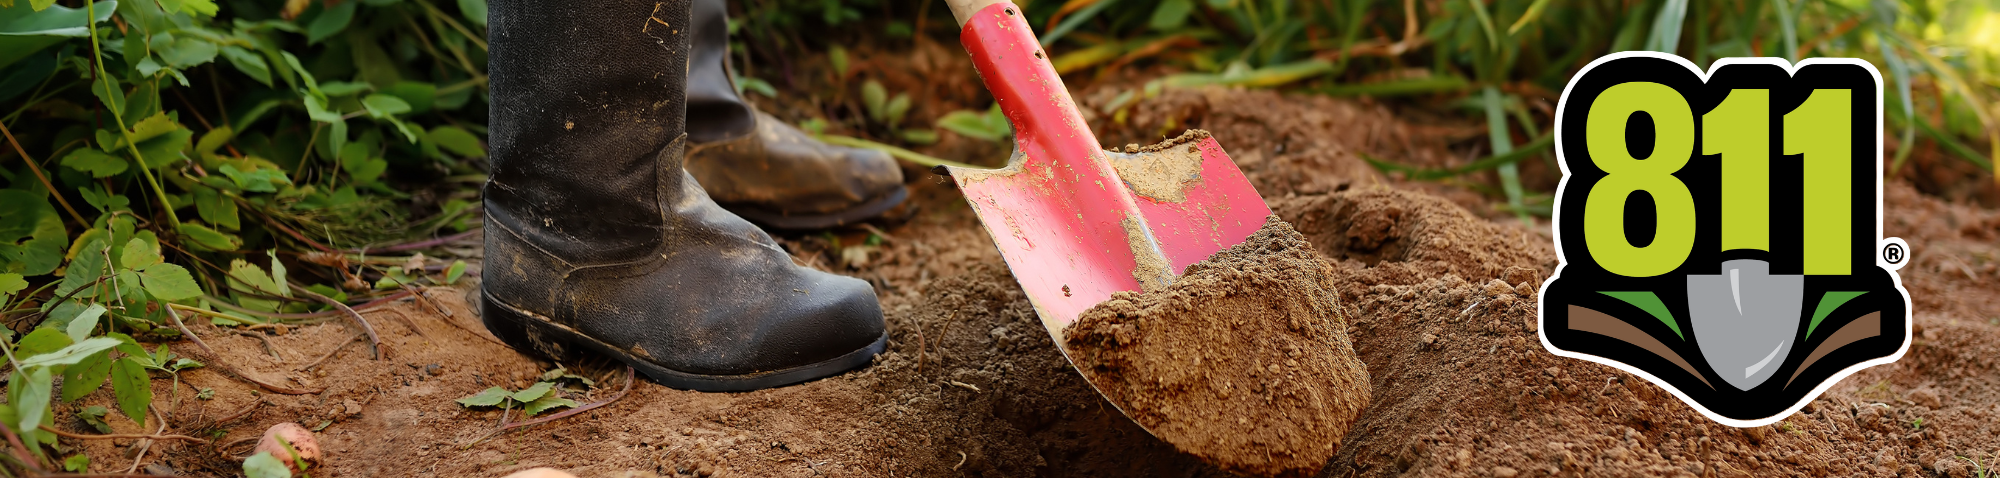 Black rubber rainboots standing on a patch of dirt. A red shovel full of dirt is above a hole in the ground.